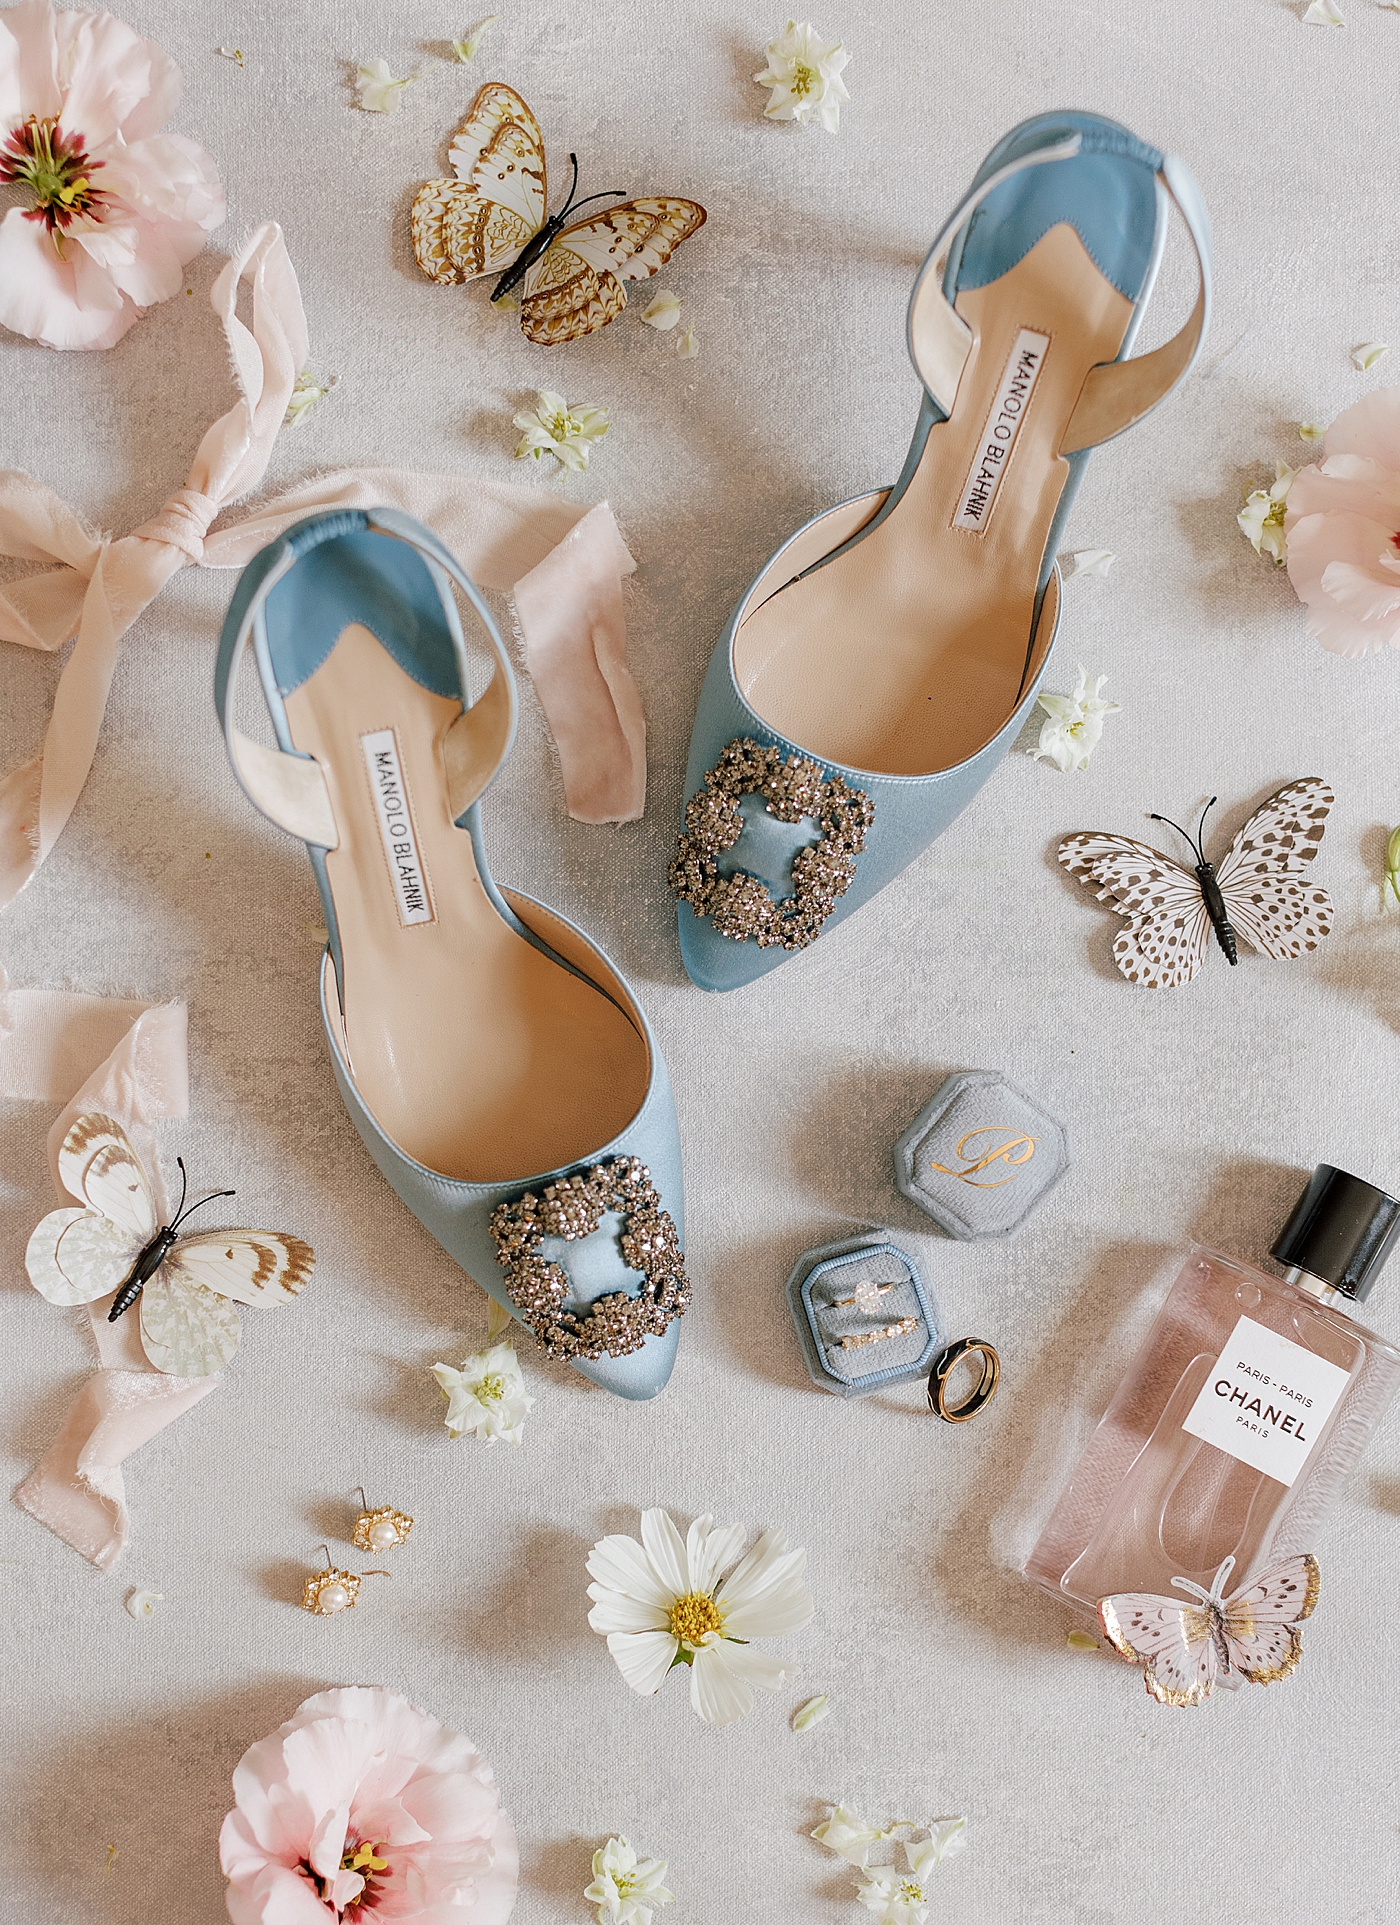 Light blue Manolo Blahnik heels styled with flowers and butterflies | Image by Hope Helmuth Photography